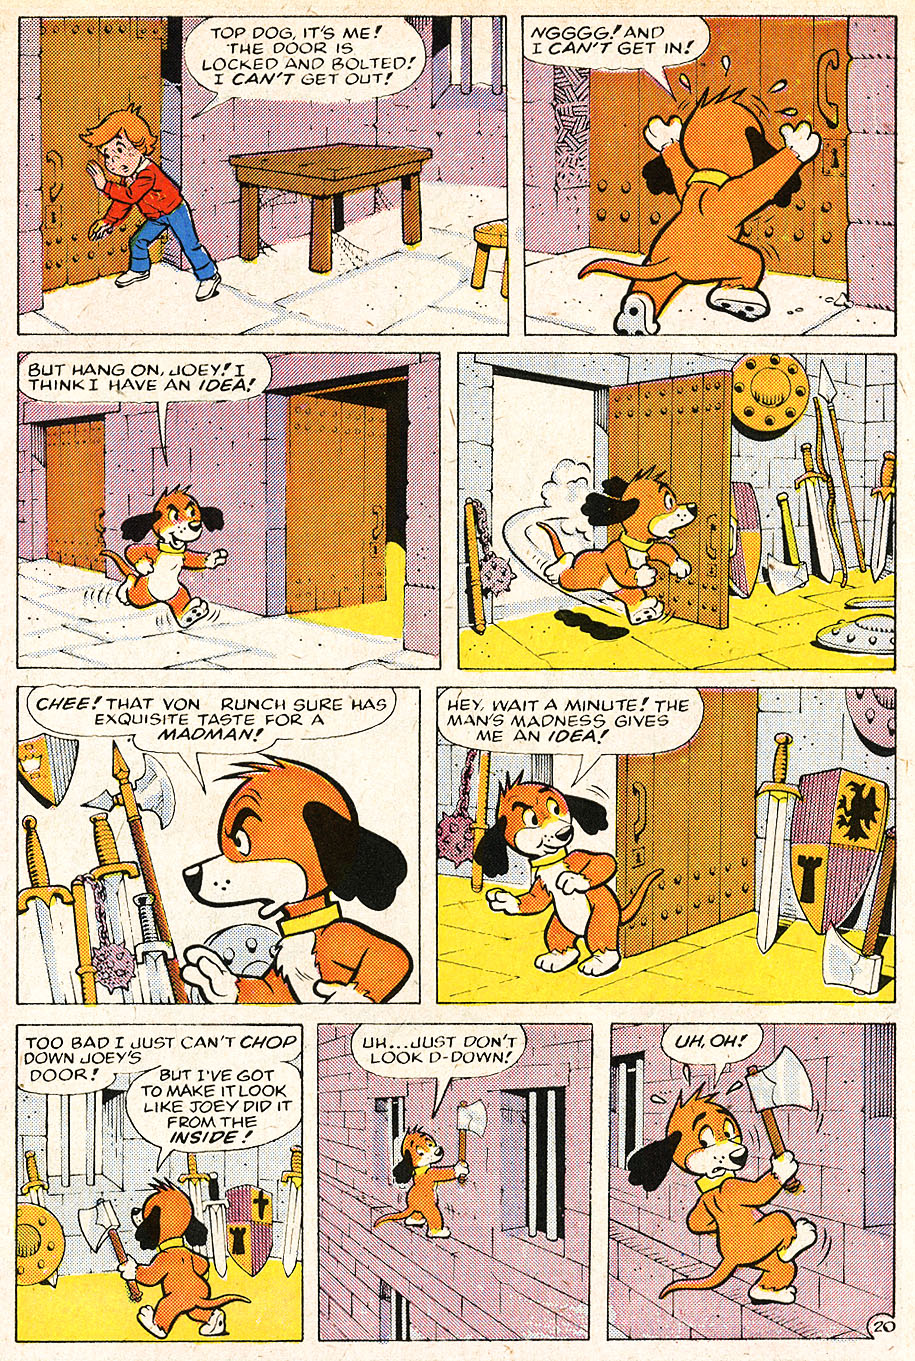 Read online Top Dog comic -  Issue #7 - 29